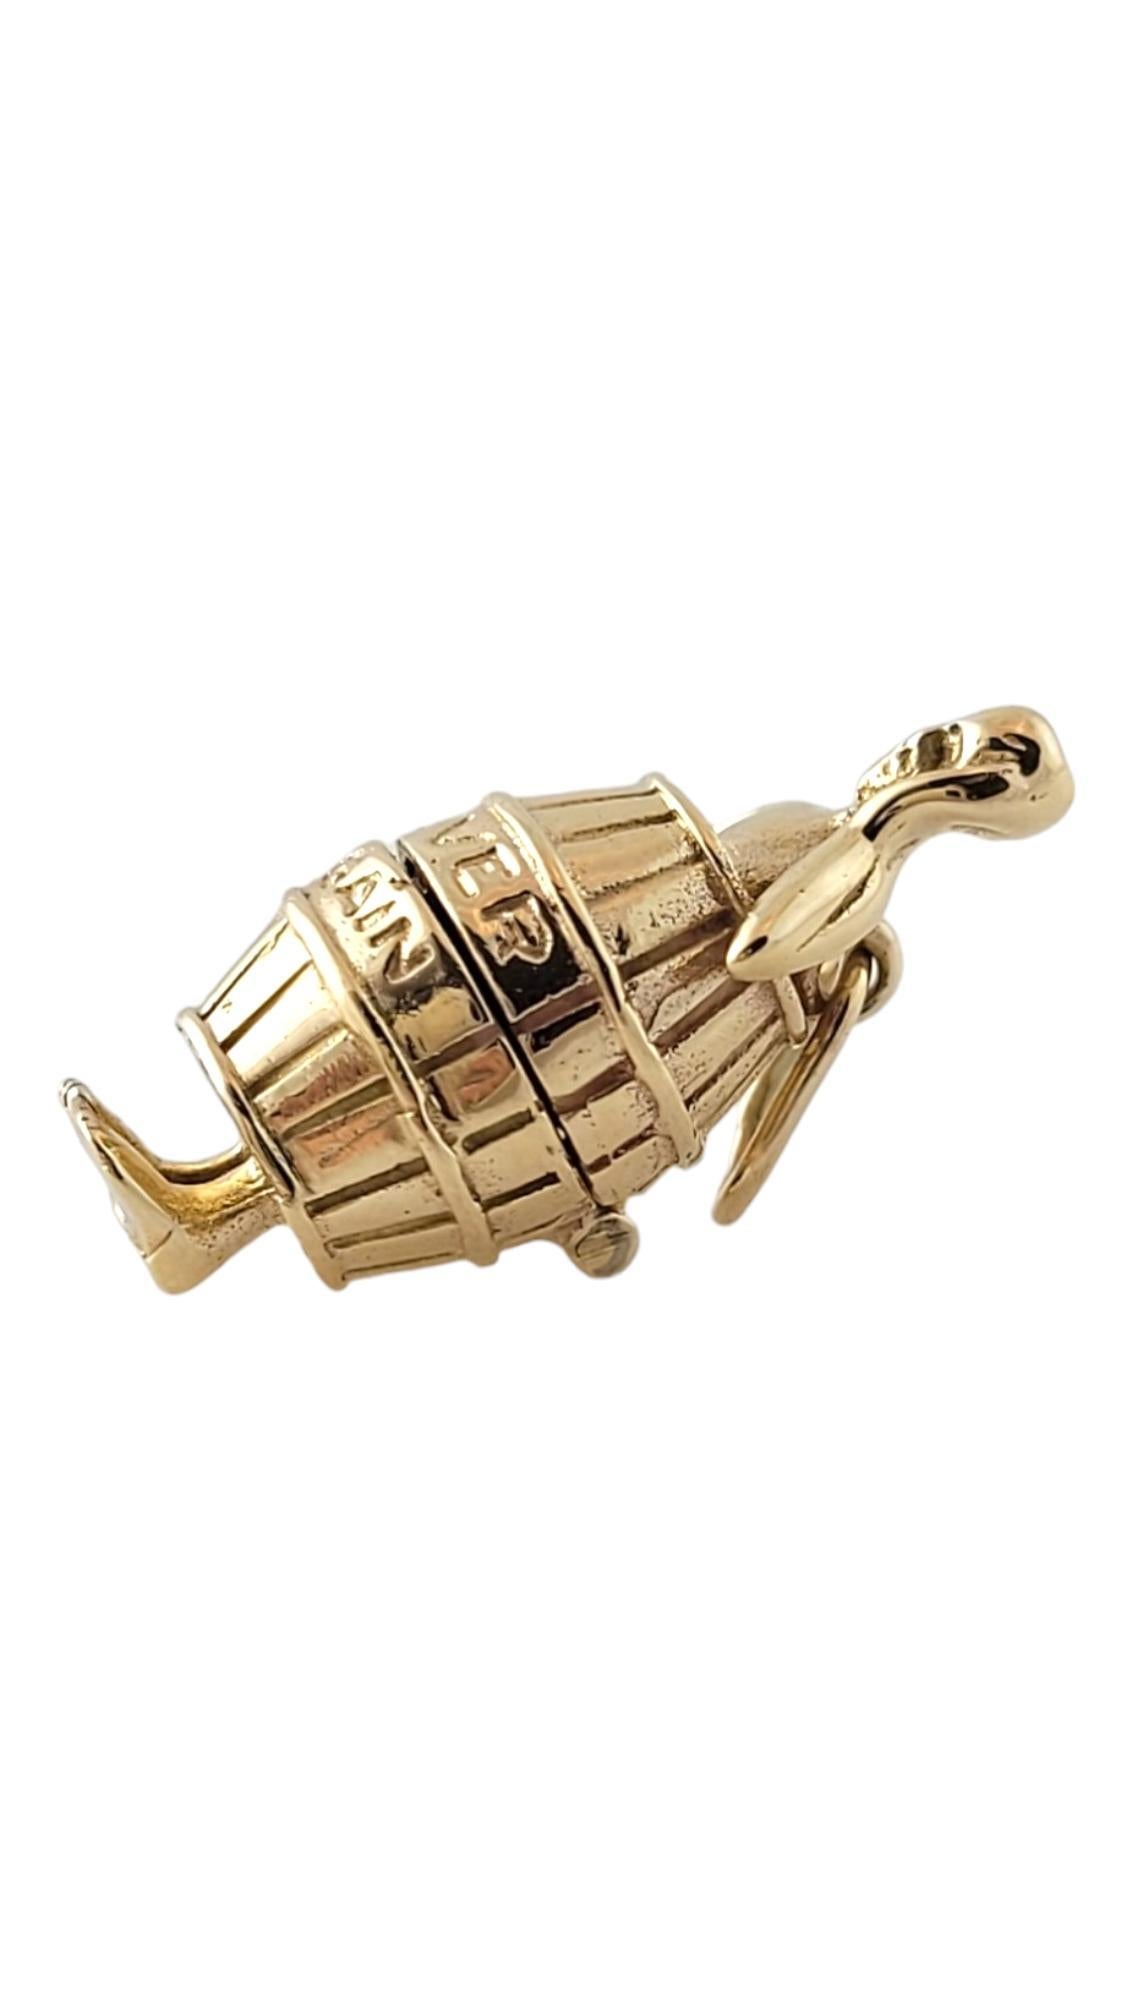 Vintage 14K Yellow Gold Niagra Falls Man in a Barrel Charm #16895

This 14K yellow gold charm features a Niagra Falls man in a barrel that opens and closes!

Size: 22.4mm X 10.4mm X 10.2mm

Weight: 2.7 dwt/ 4.3 g

Hallmark: 14K NEVER AGAIN

Very